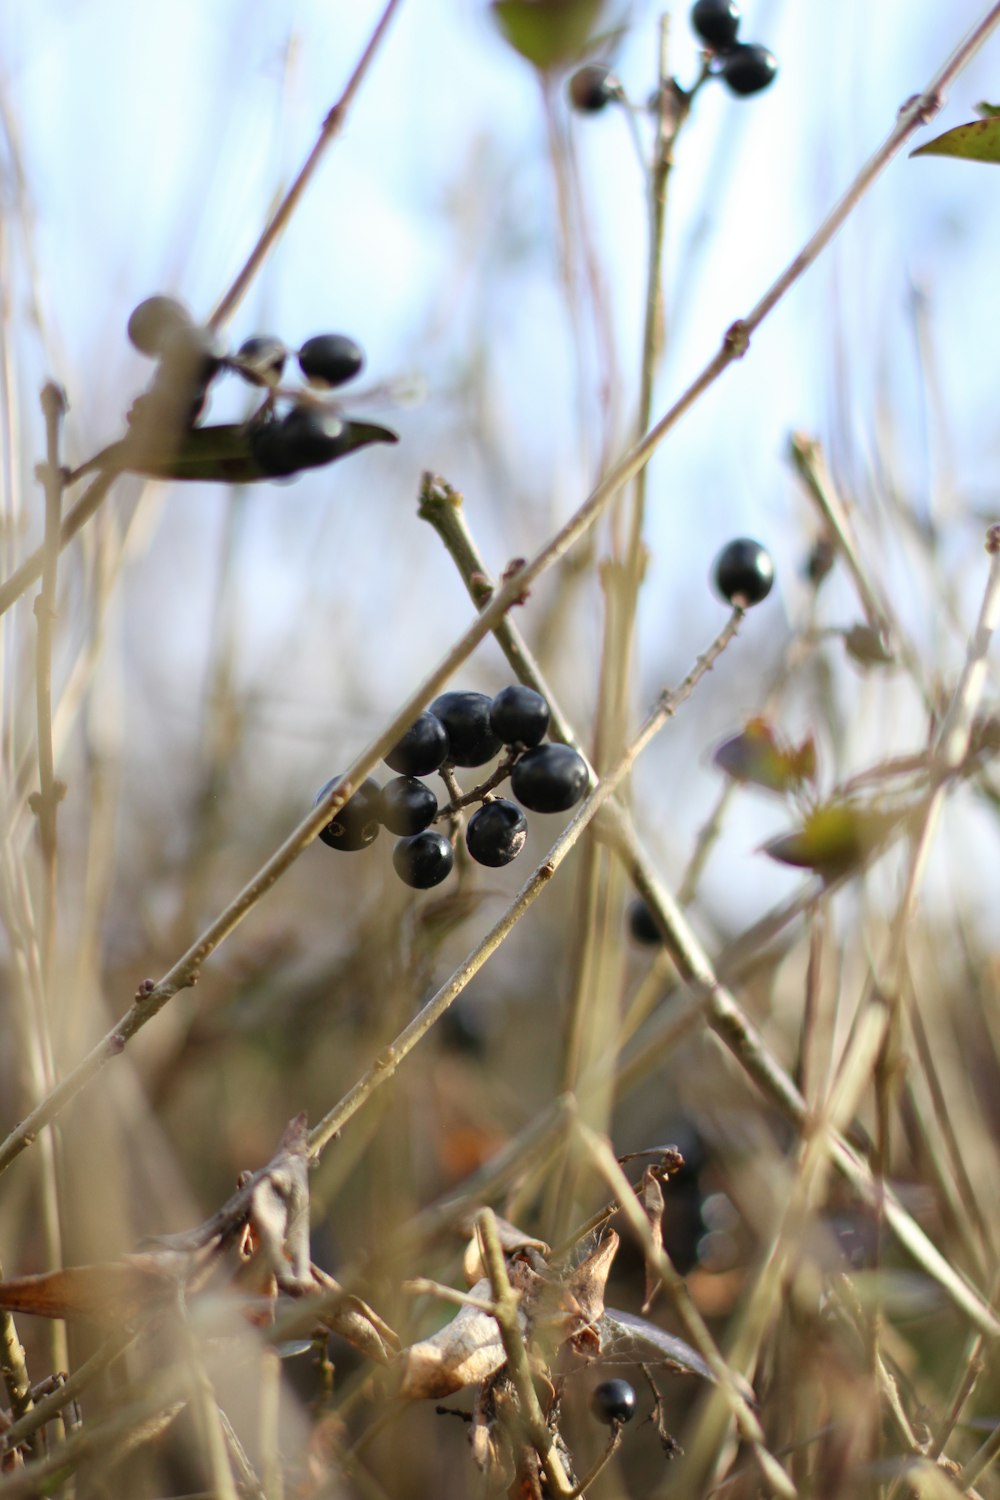 a close up of a plant with berries on it